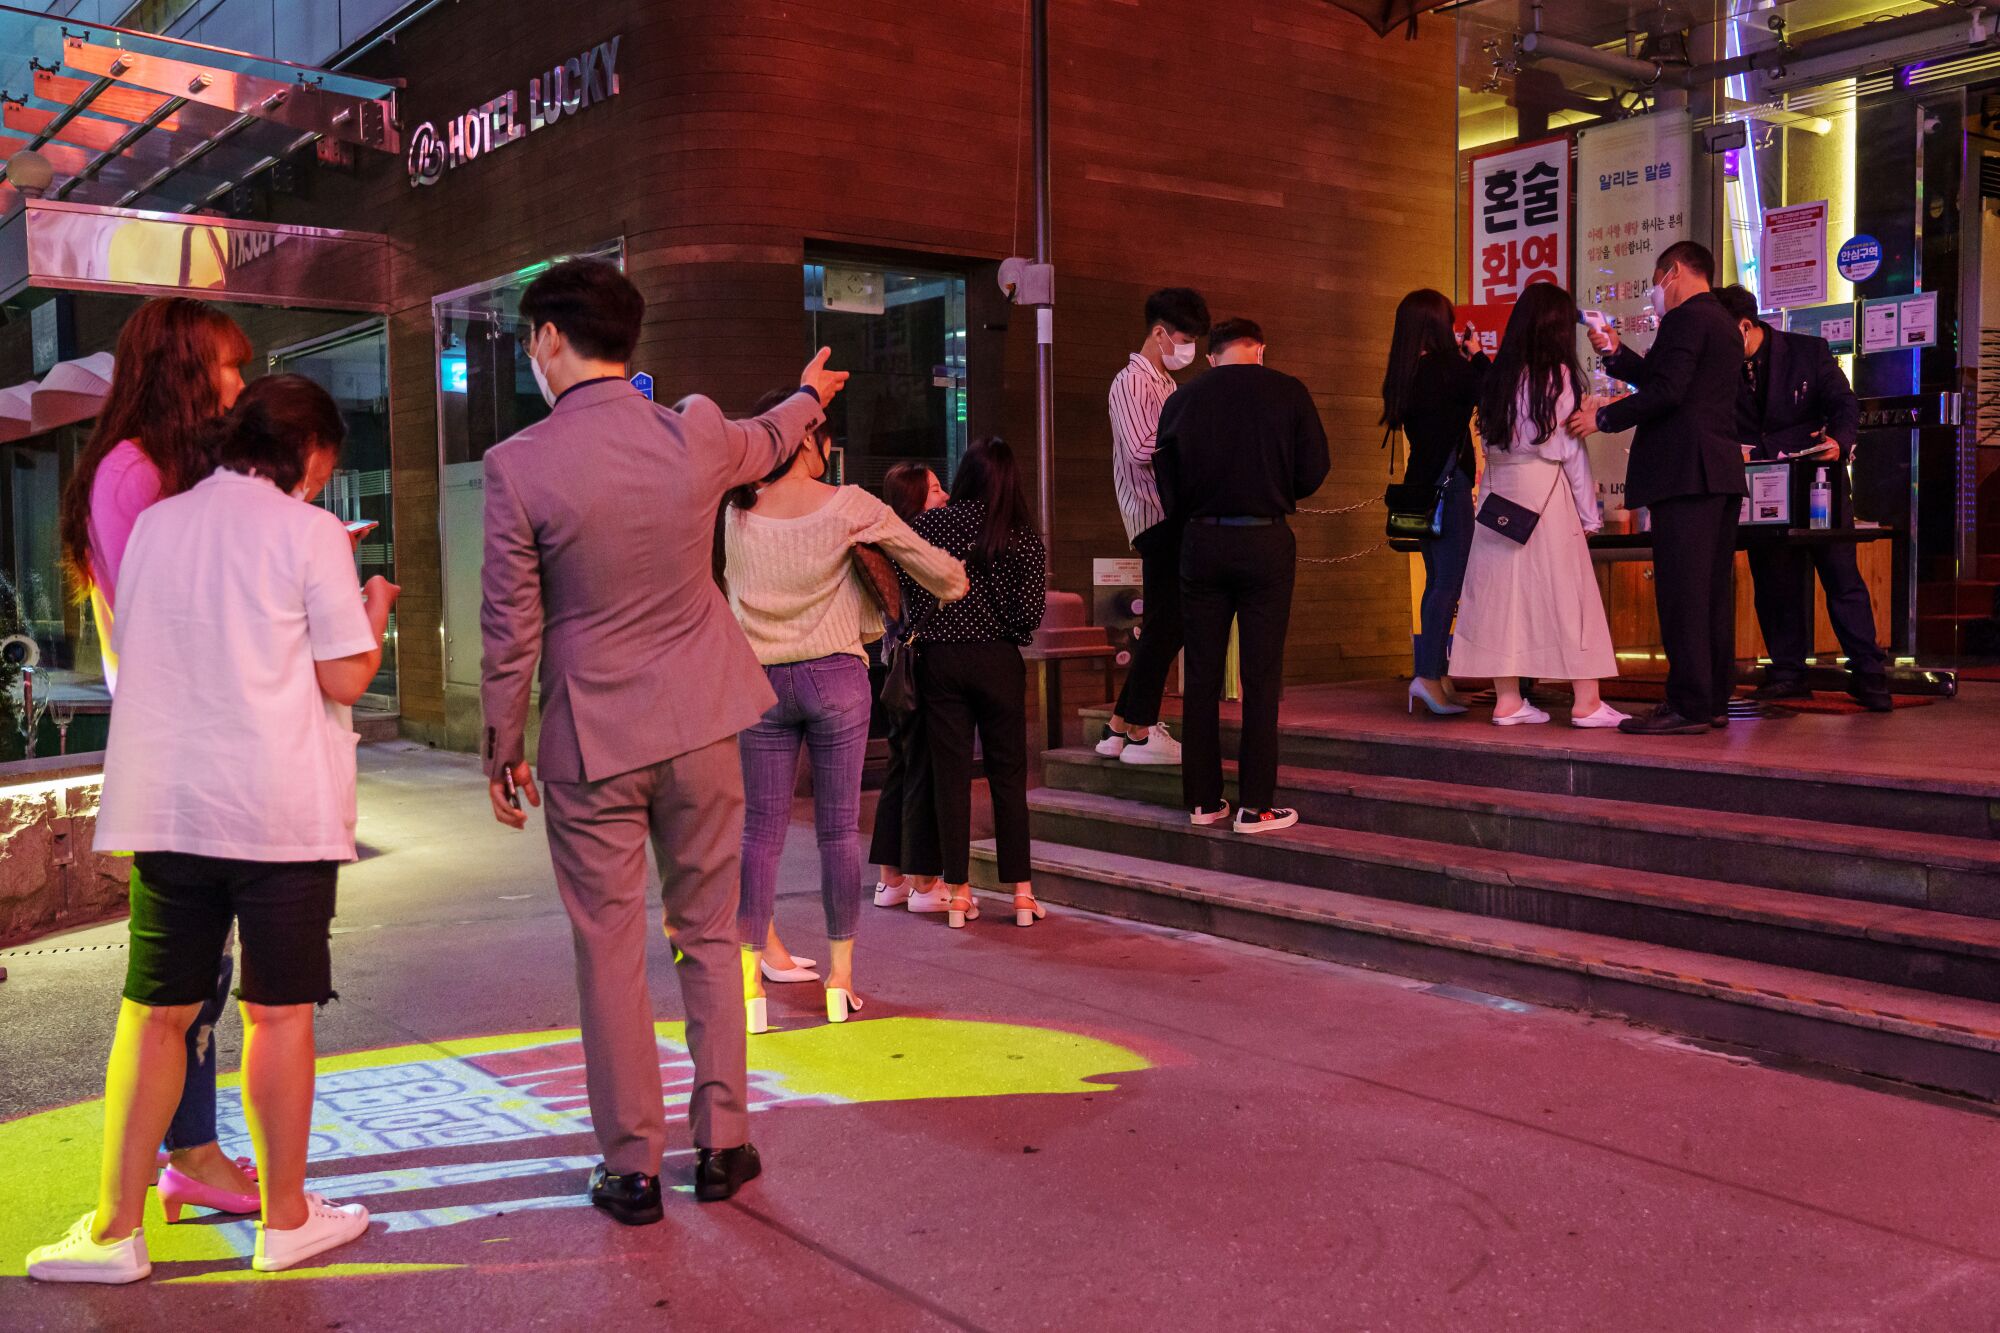 A line stretches outside Nightclub Seven in Daejeon, South Korea, as customers figure out the new QR code registry.